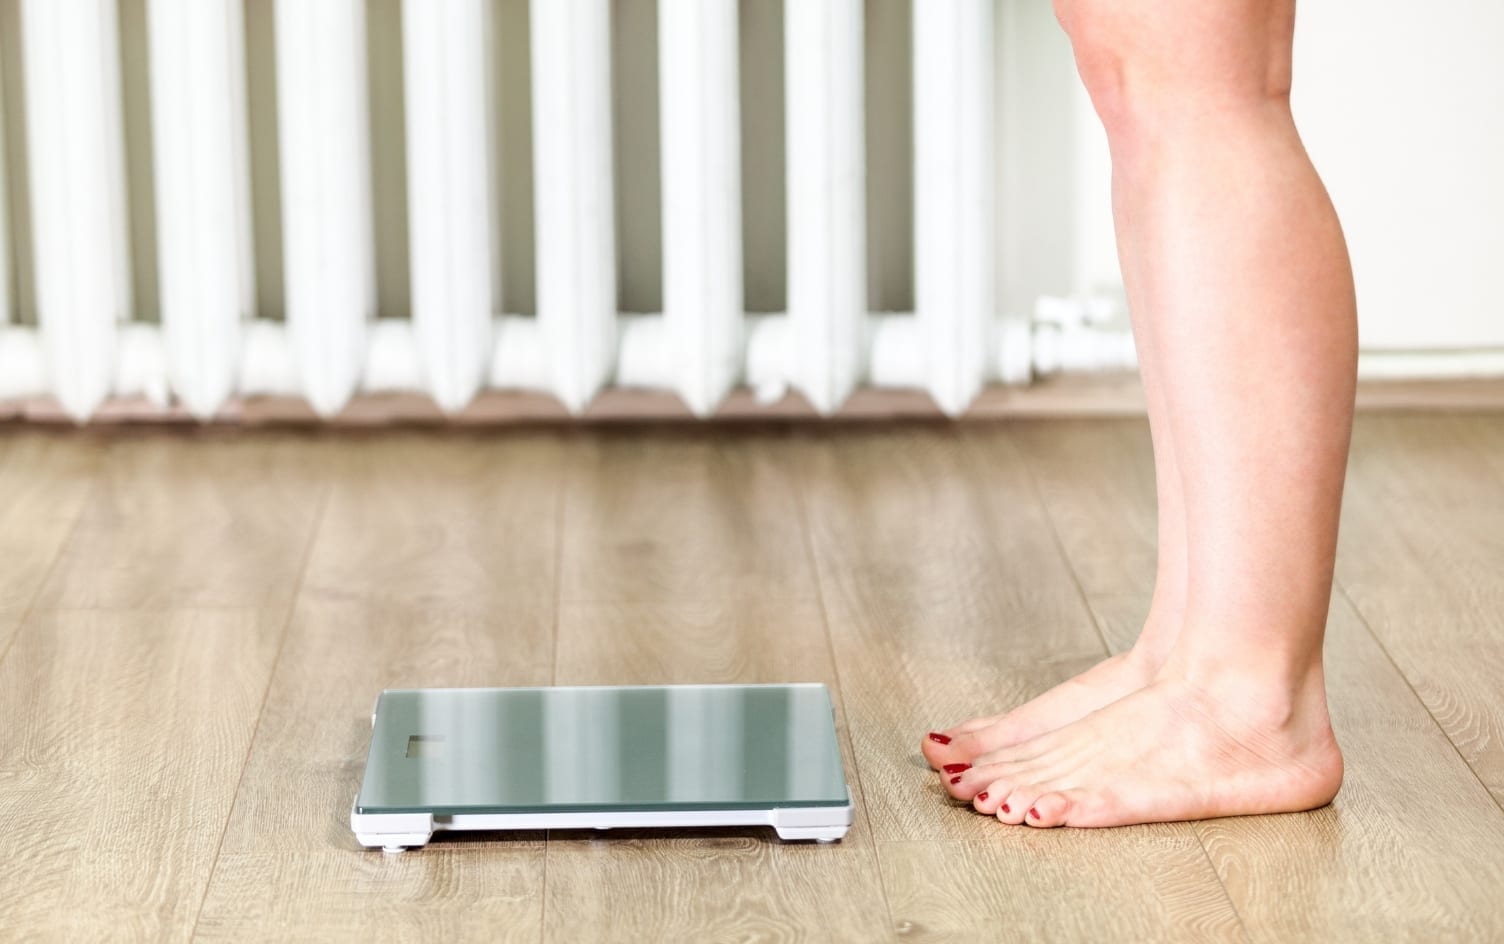 Things You Need to Know Before Weighing Yourself